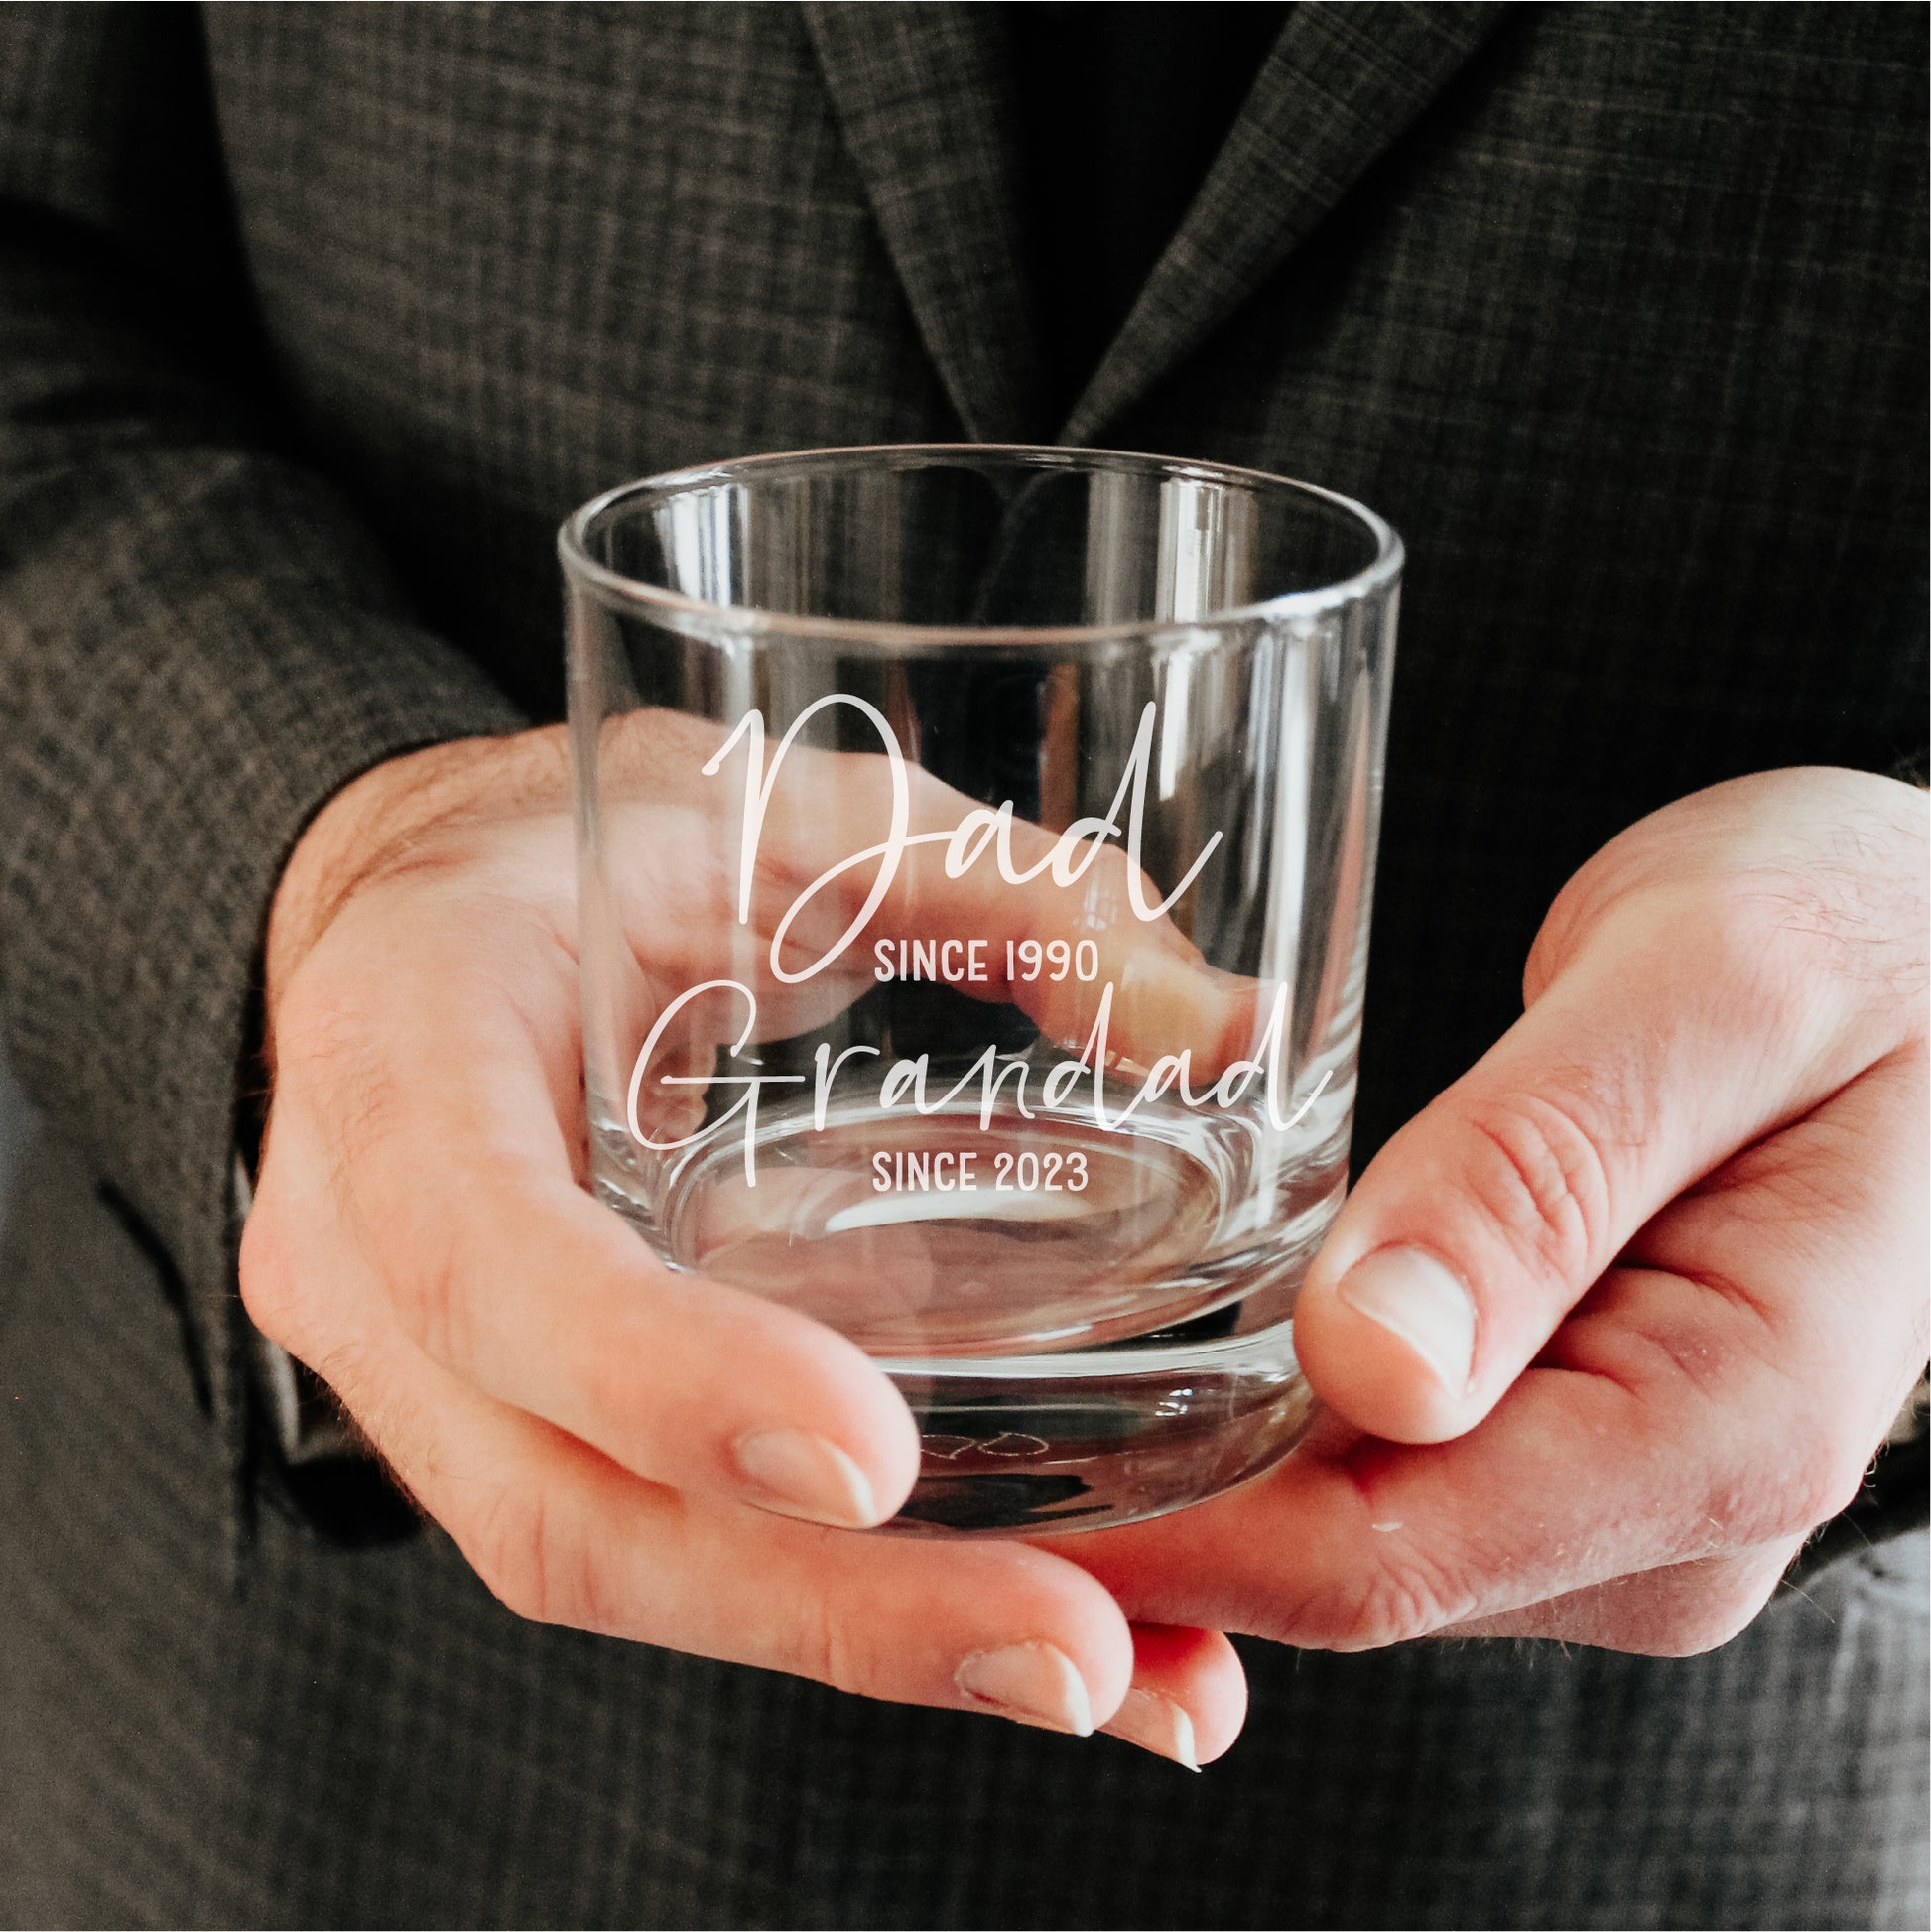 Mans hands holding an engraved whisky glass, personalised with the wording Dad since 1990 and Grandad since 2023 on it